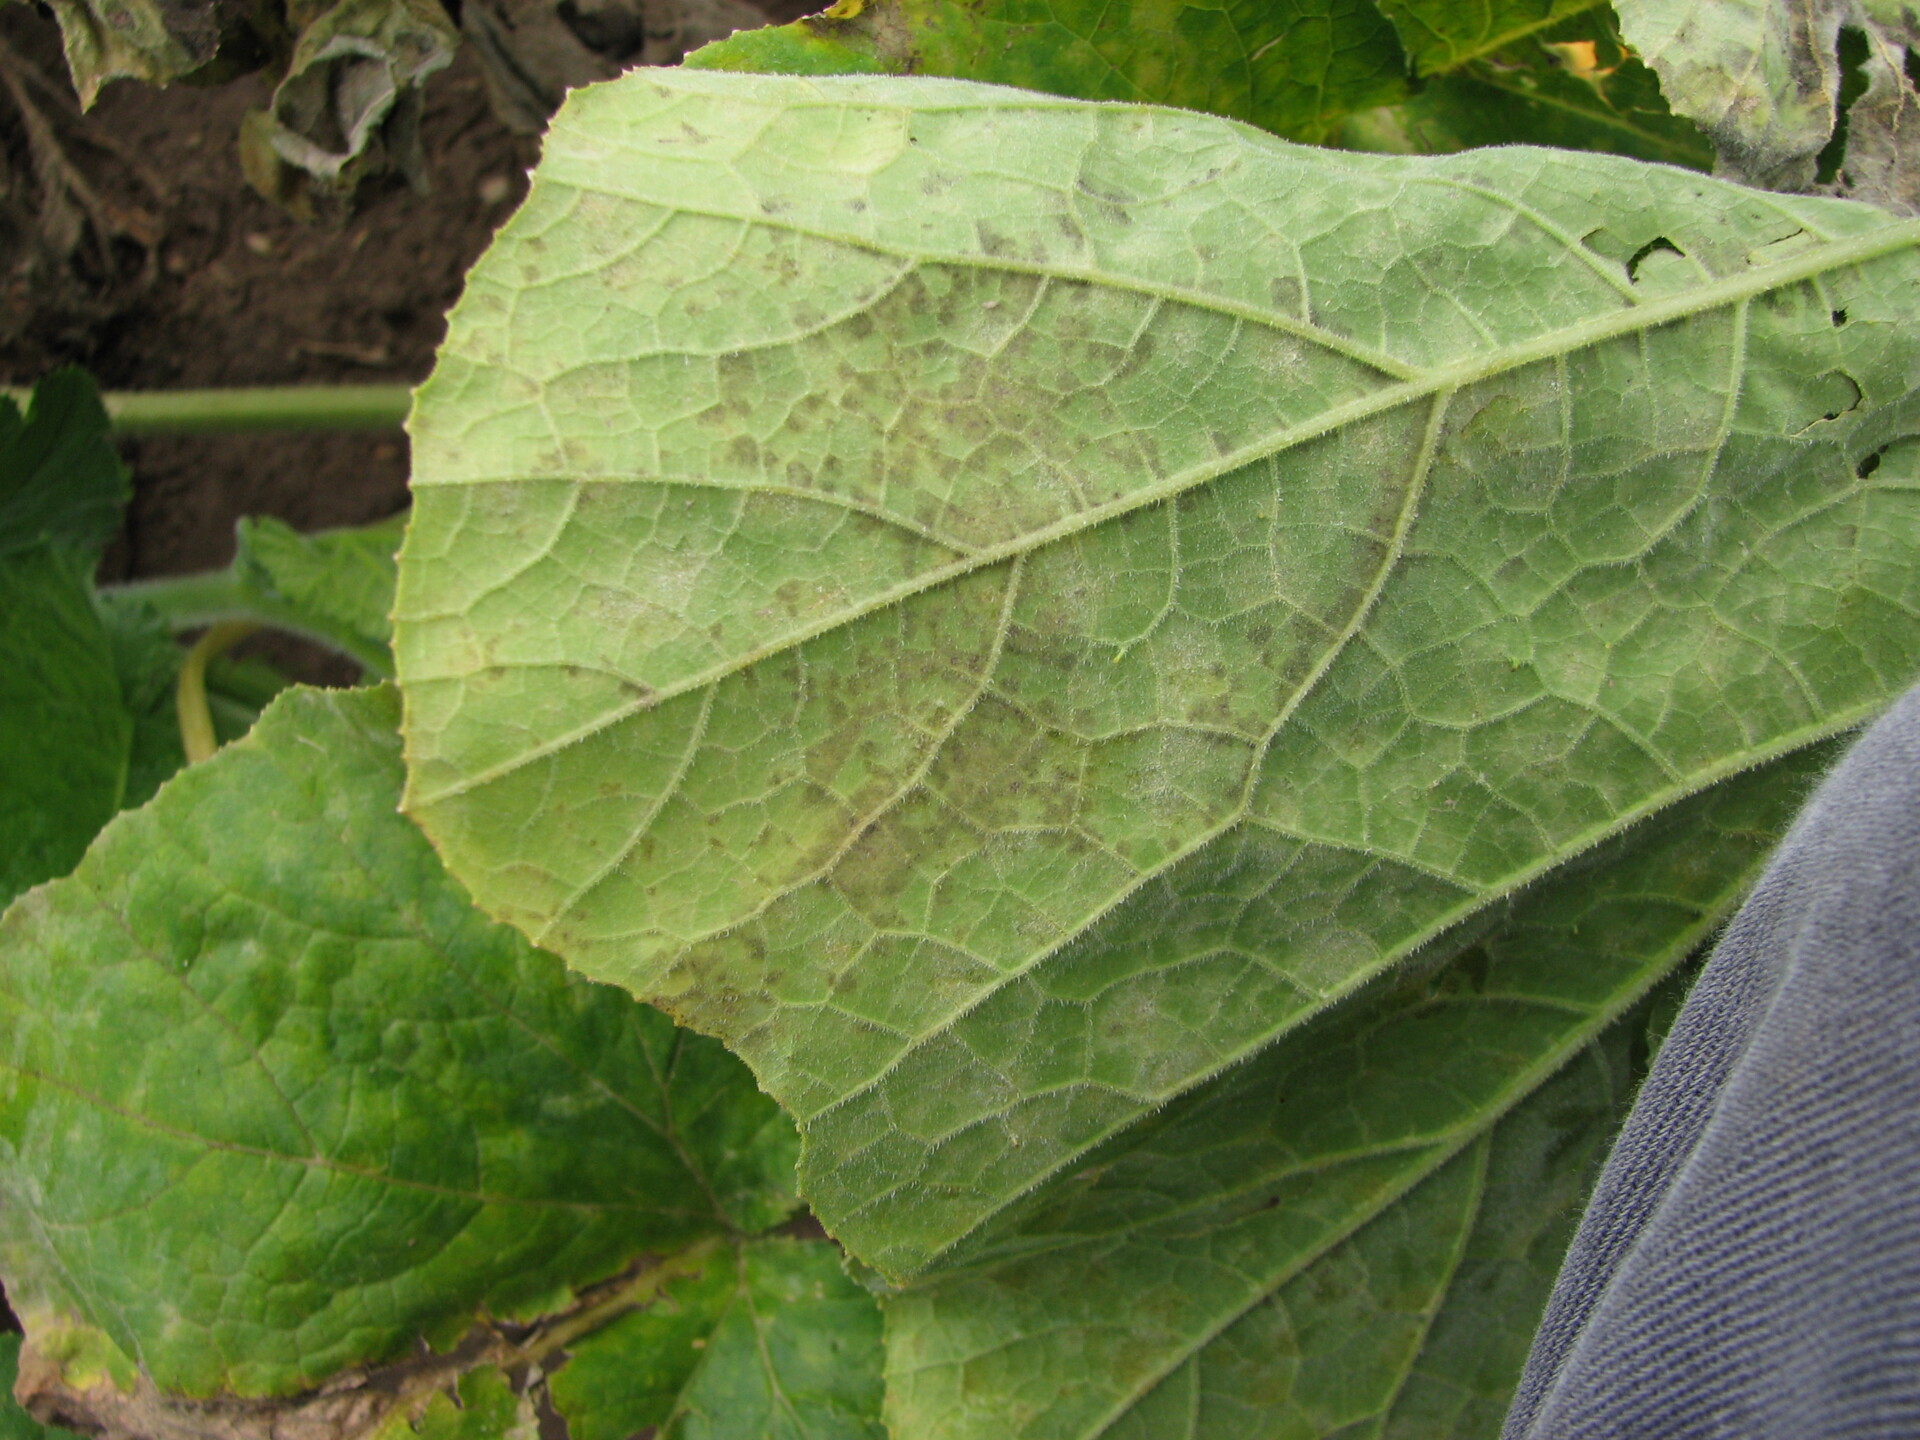 Under moist conditions, the causal fungus for downy mildew of pumpkin can be observed to sporulate on the underside of the leaf.